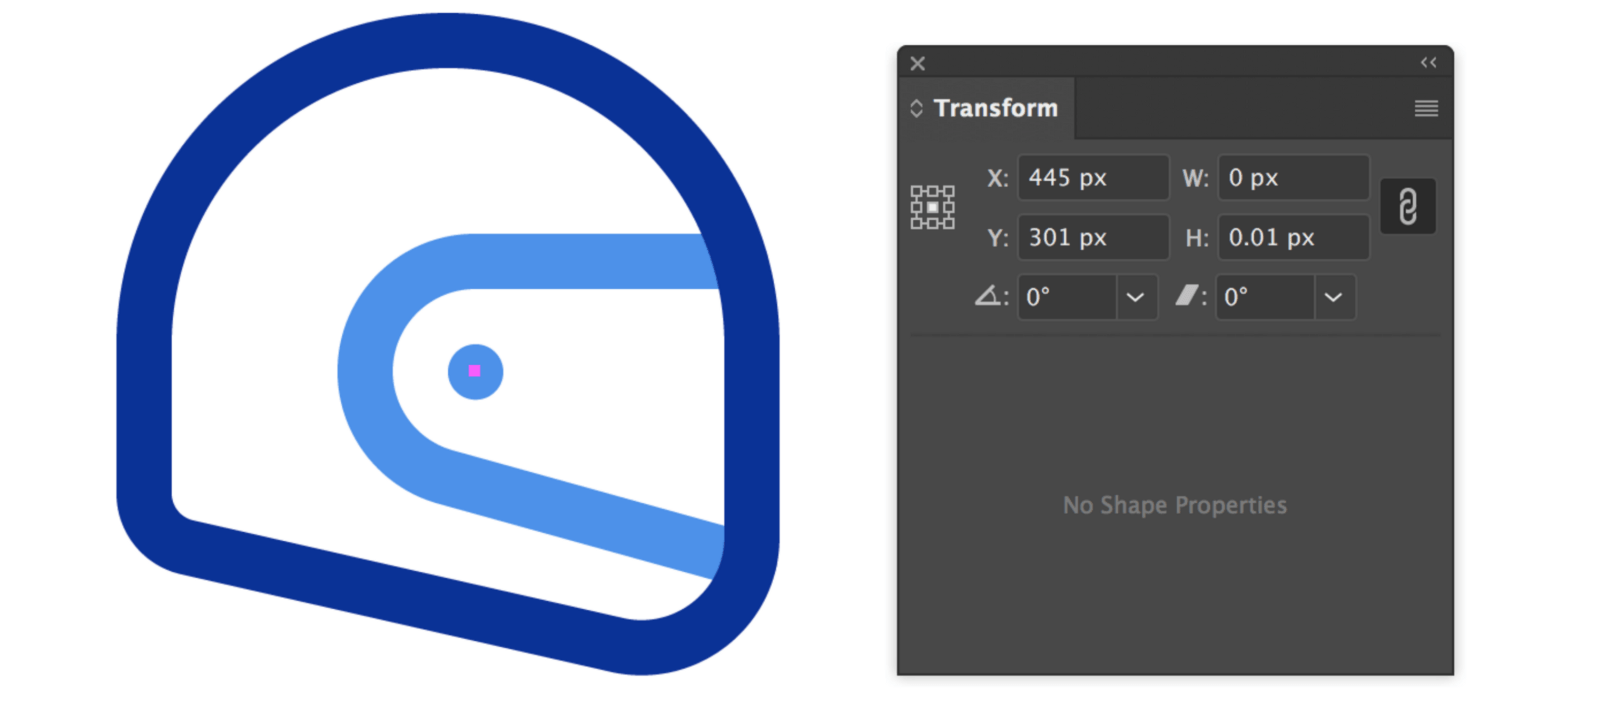 Z in Blue Circle Logo - How to Make a Dot